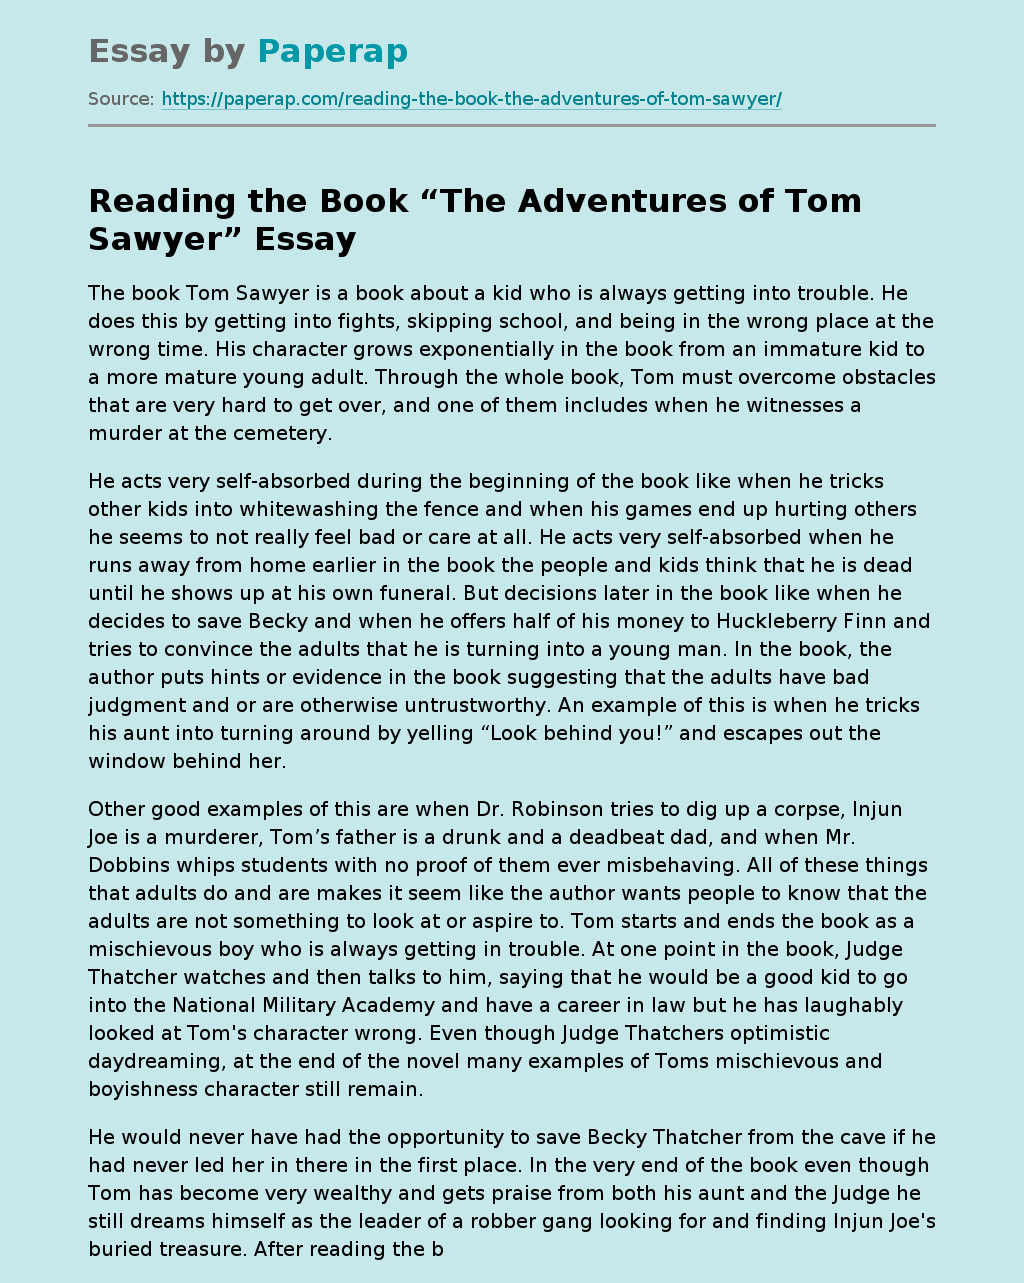 Reading the Book “The Adventures of Tom Sawyer”